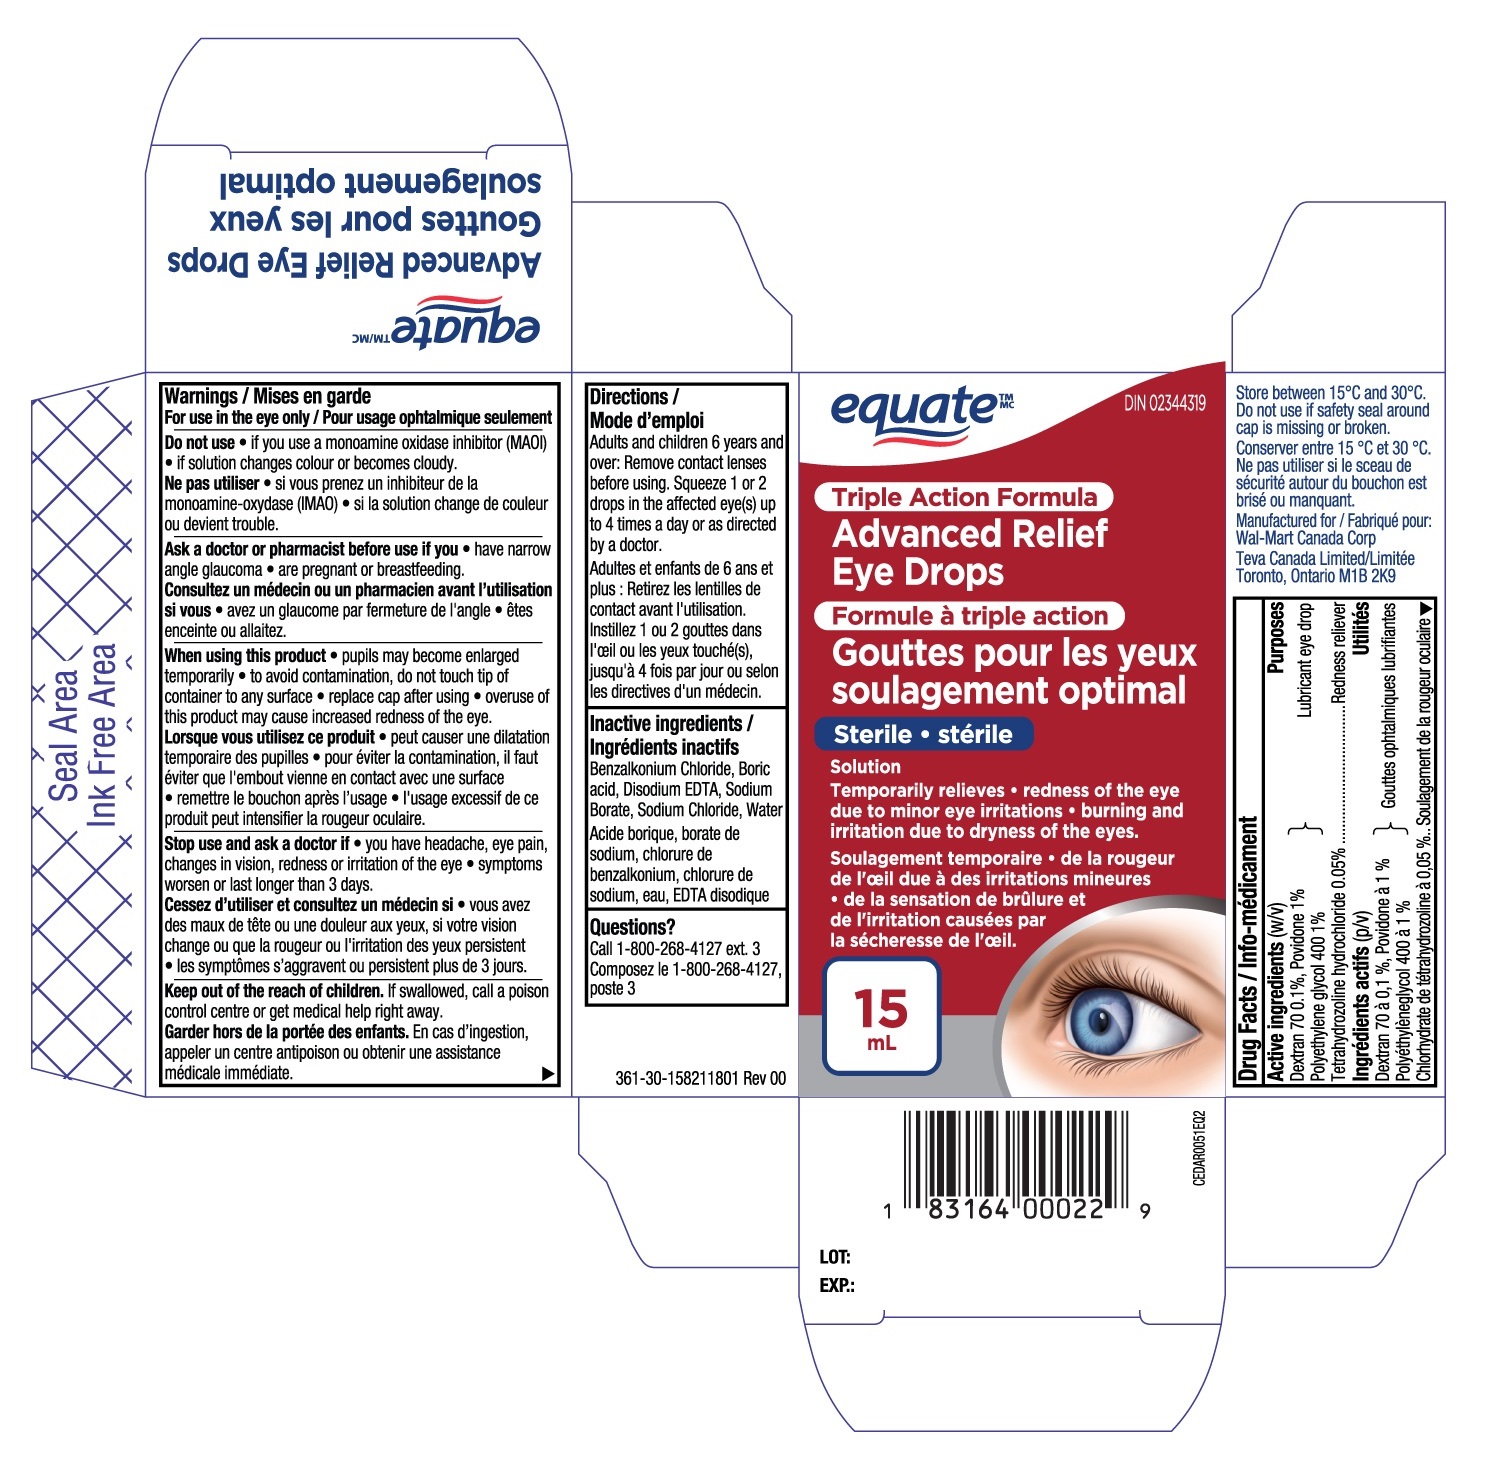 Equate Advanced Relief Eye Drops